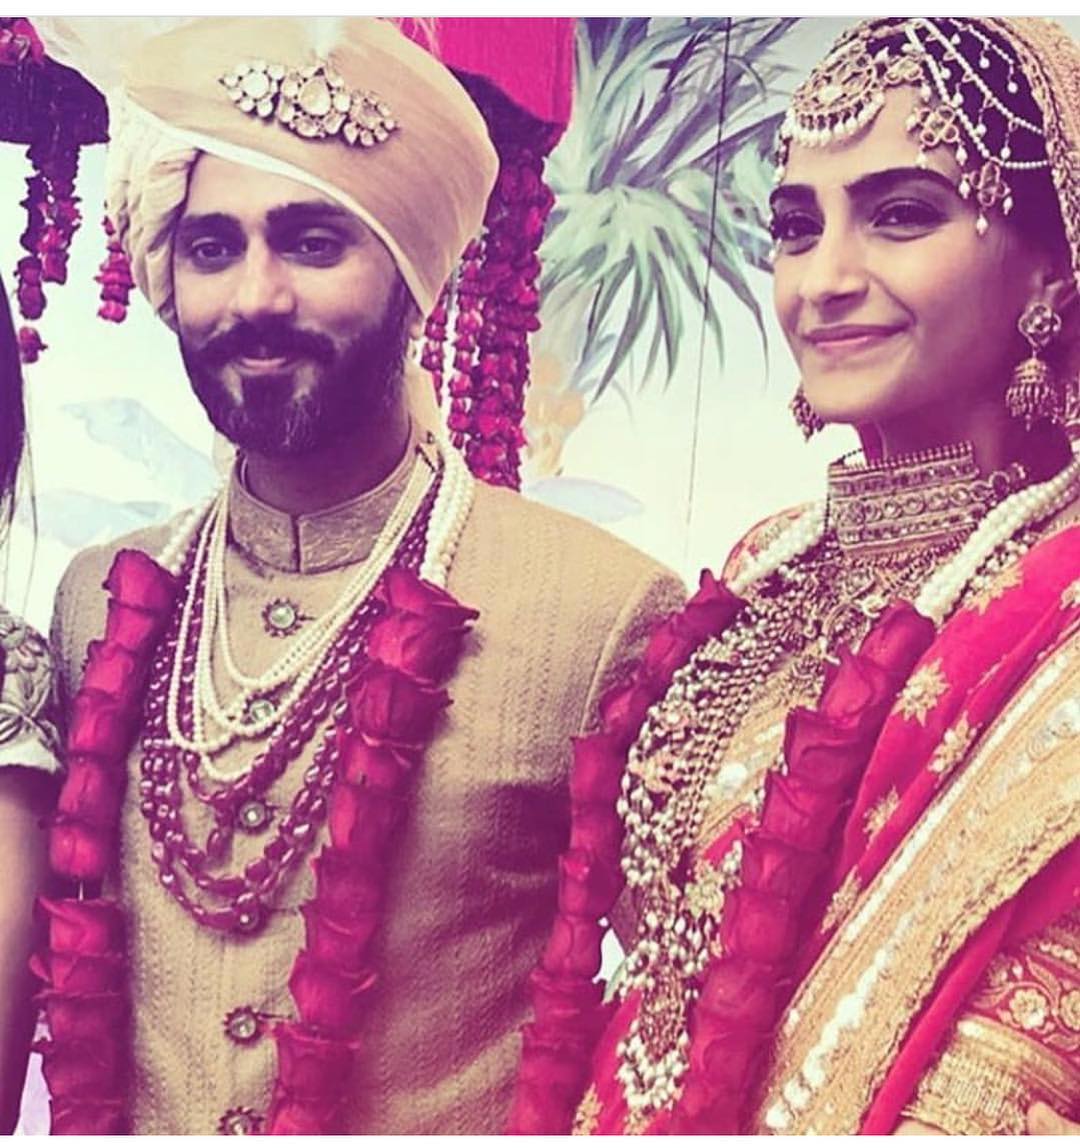 Sonam Kapoor Wedding Pics – Engagement and Complete Wedding Pictures